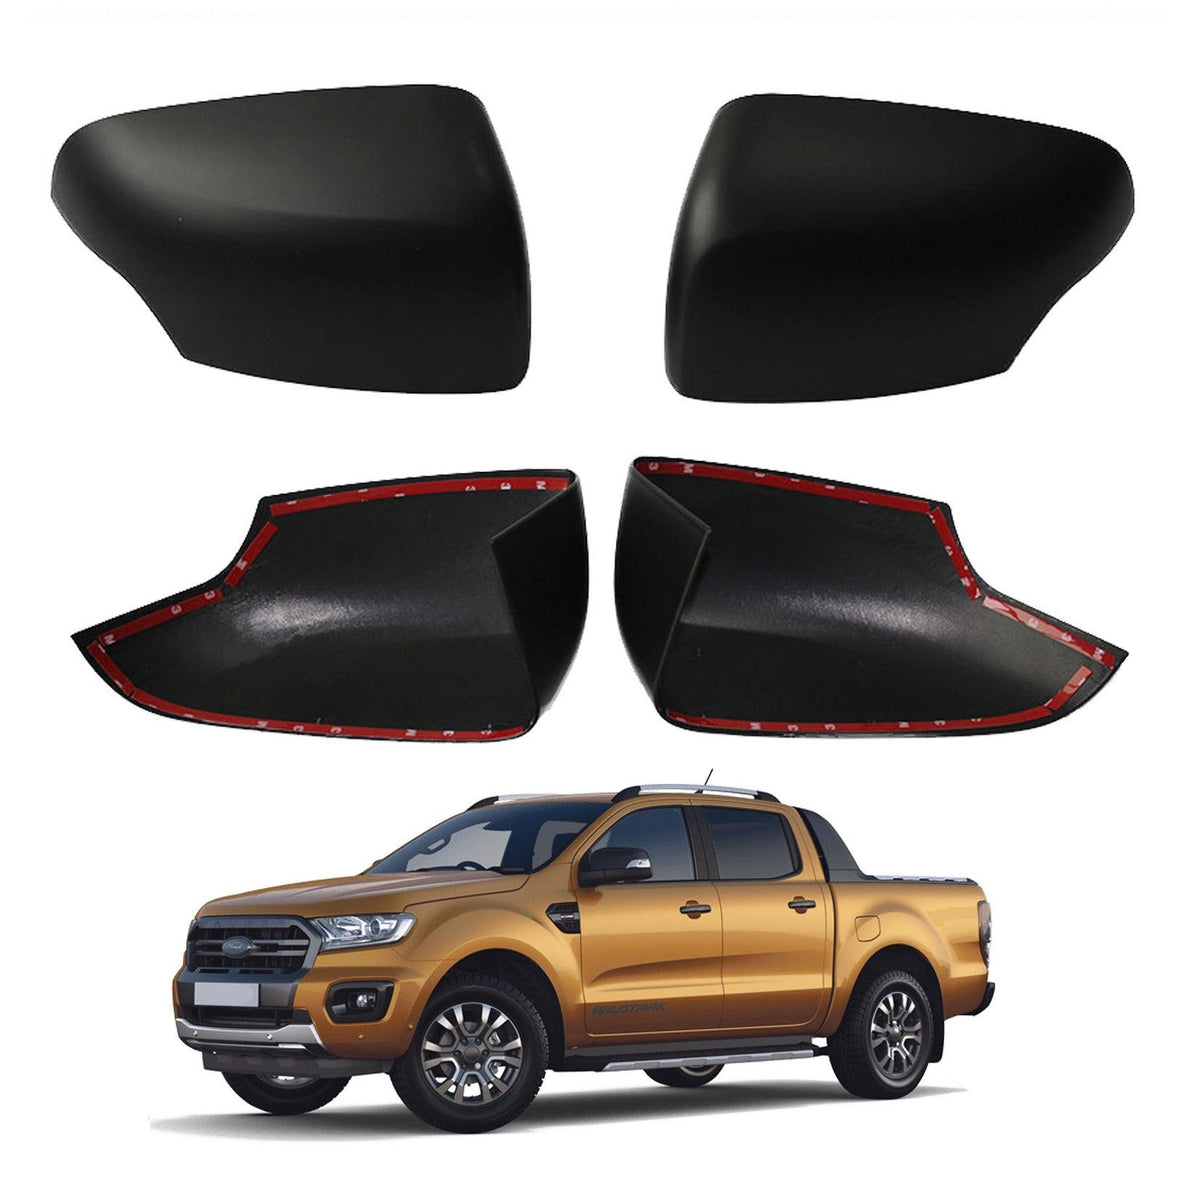 FORD RANGER T6 2016-2022 - WING MIRROR COVERS CAPS - BLACK - PAIR - Storm Xccessories2